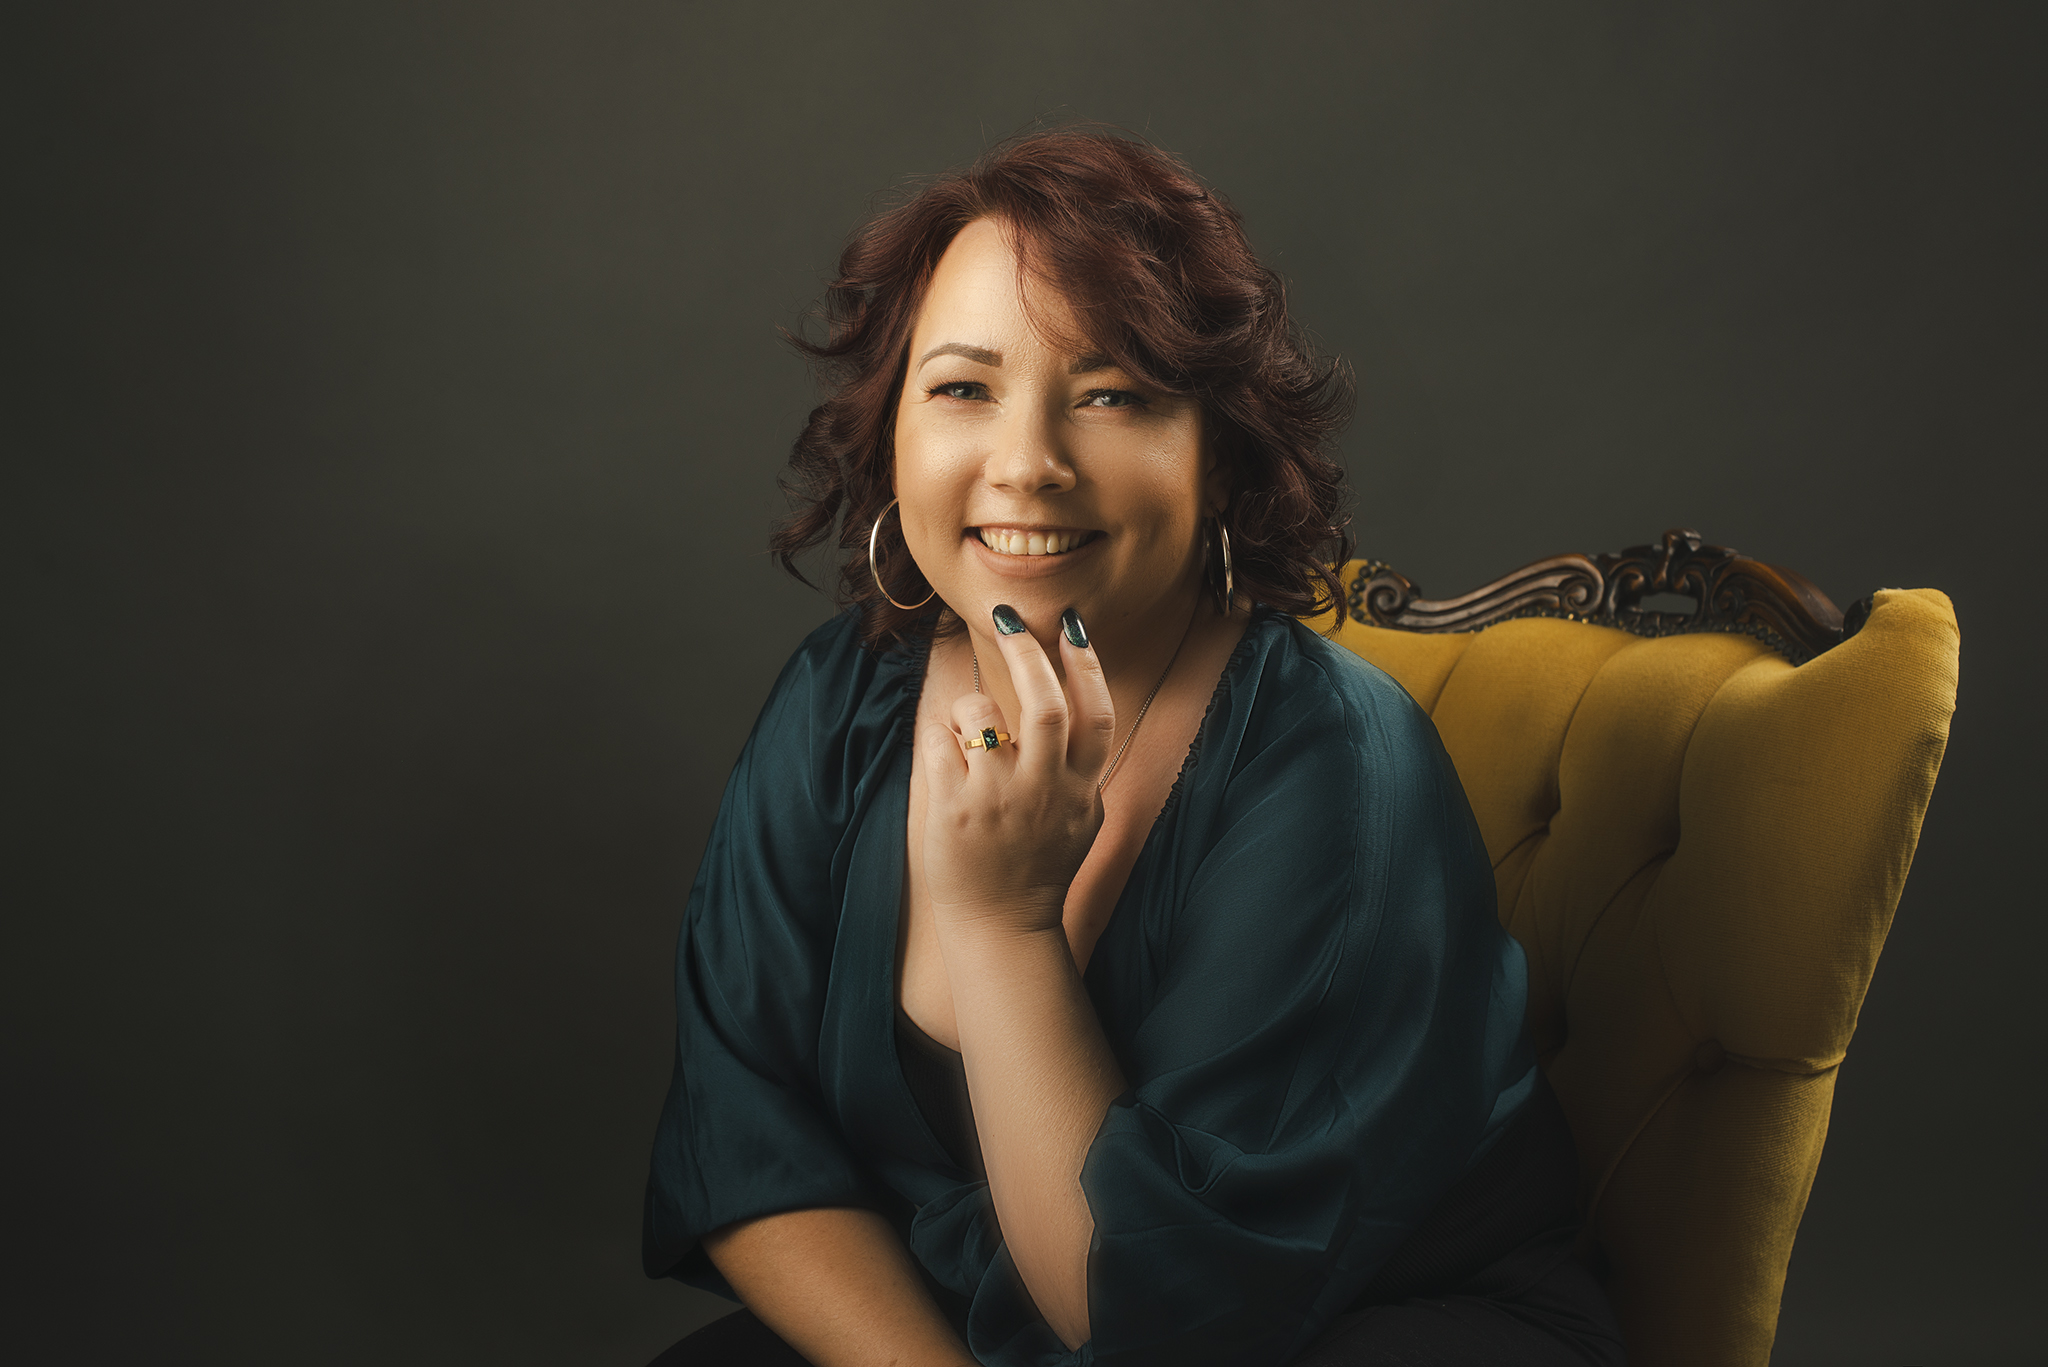 A creative headshot of a lady sitting in a dark room on a mustard, vintage, upholstered & wood carved chair. She has fiery red curls, wears large hoop earrings, an emerald satin shirt & leans towards the camera with an elegant smile. Her hand is placed up by her chin showing her emerald nails & a vintage style emerald ring on her finger.